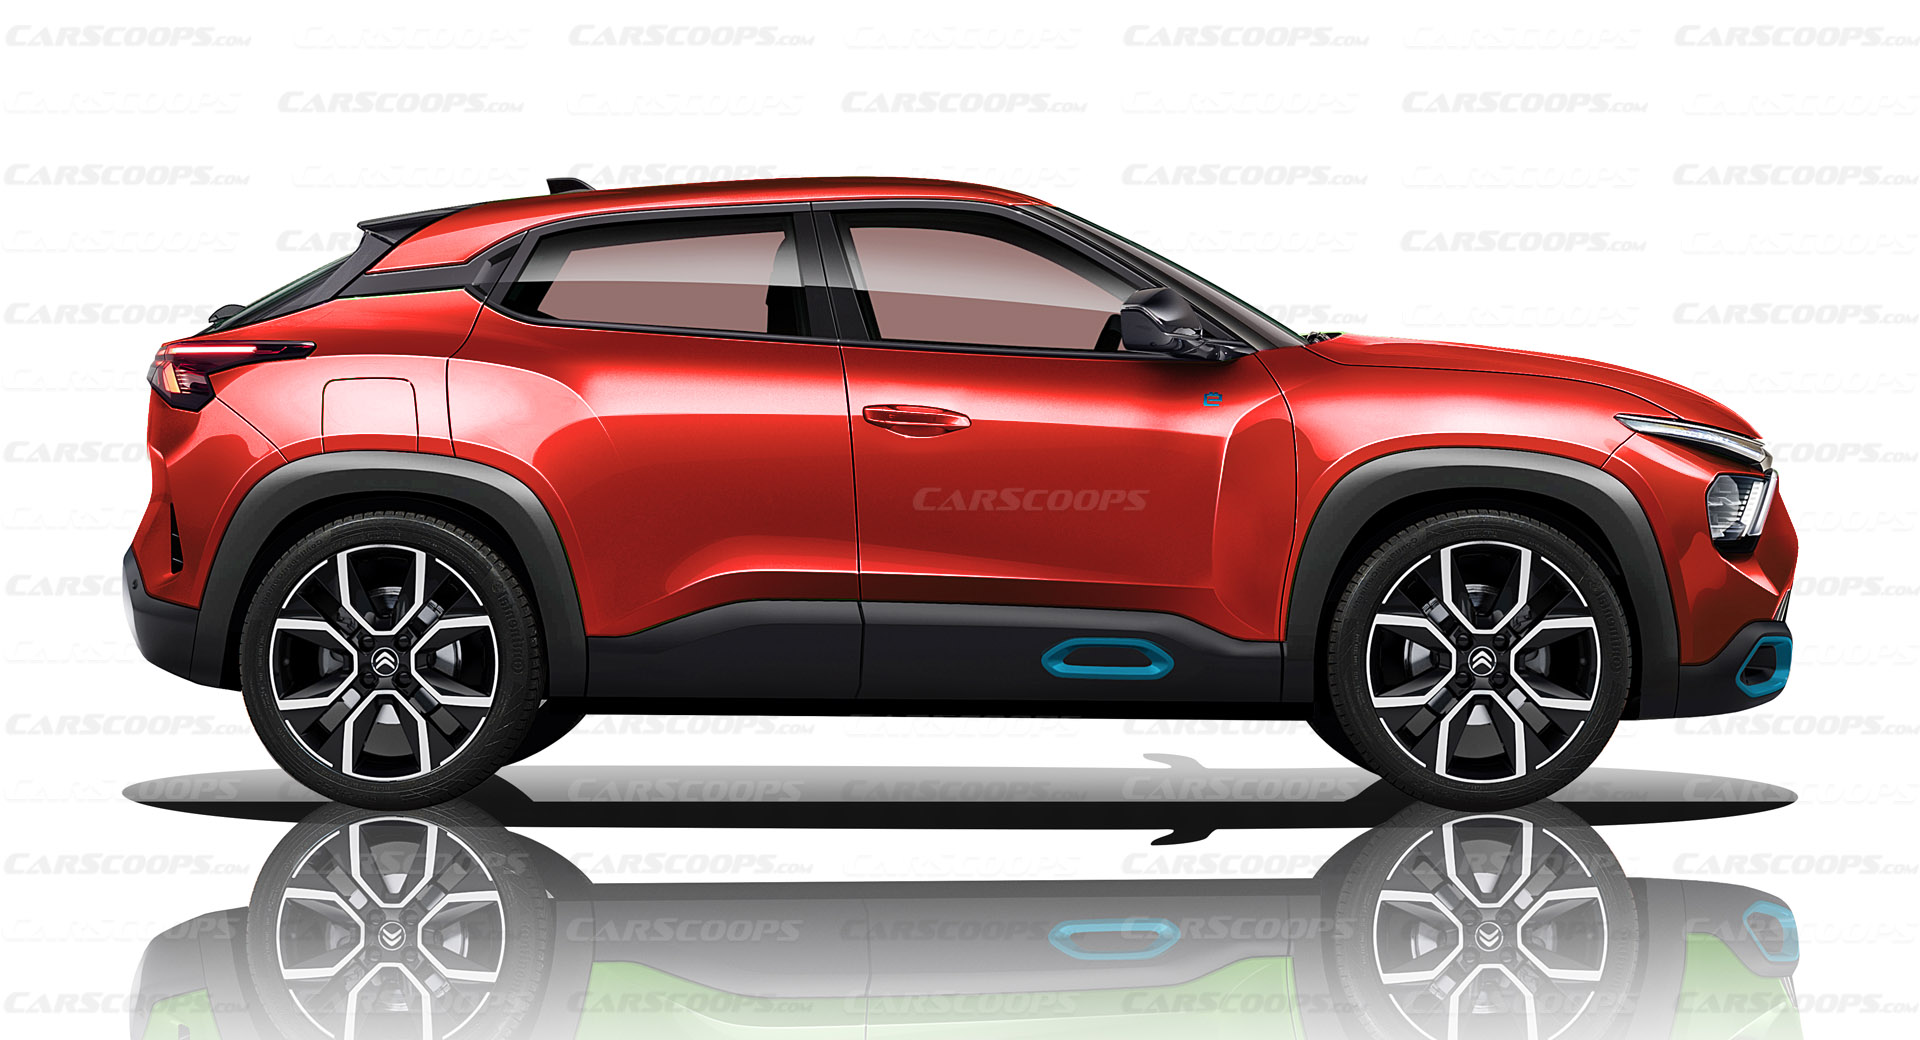 condensor Wijden Caroline 2023 Citroën C4 Aircross Would Make A Fine Addition To The Brand's SUV  Range | Carscoops